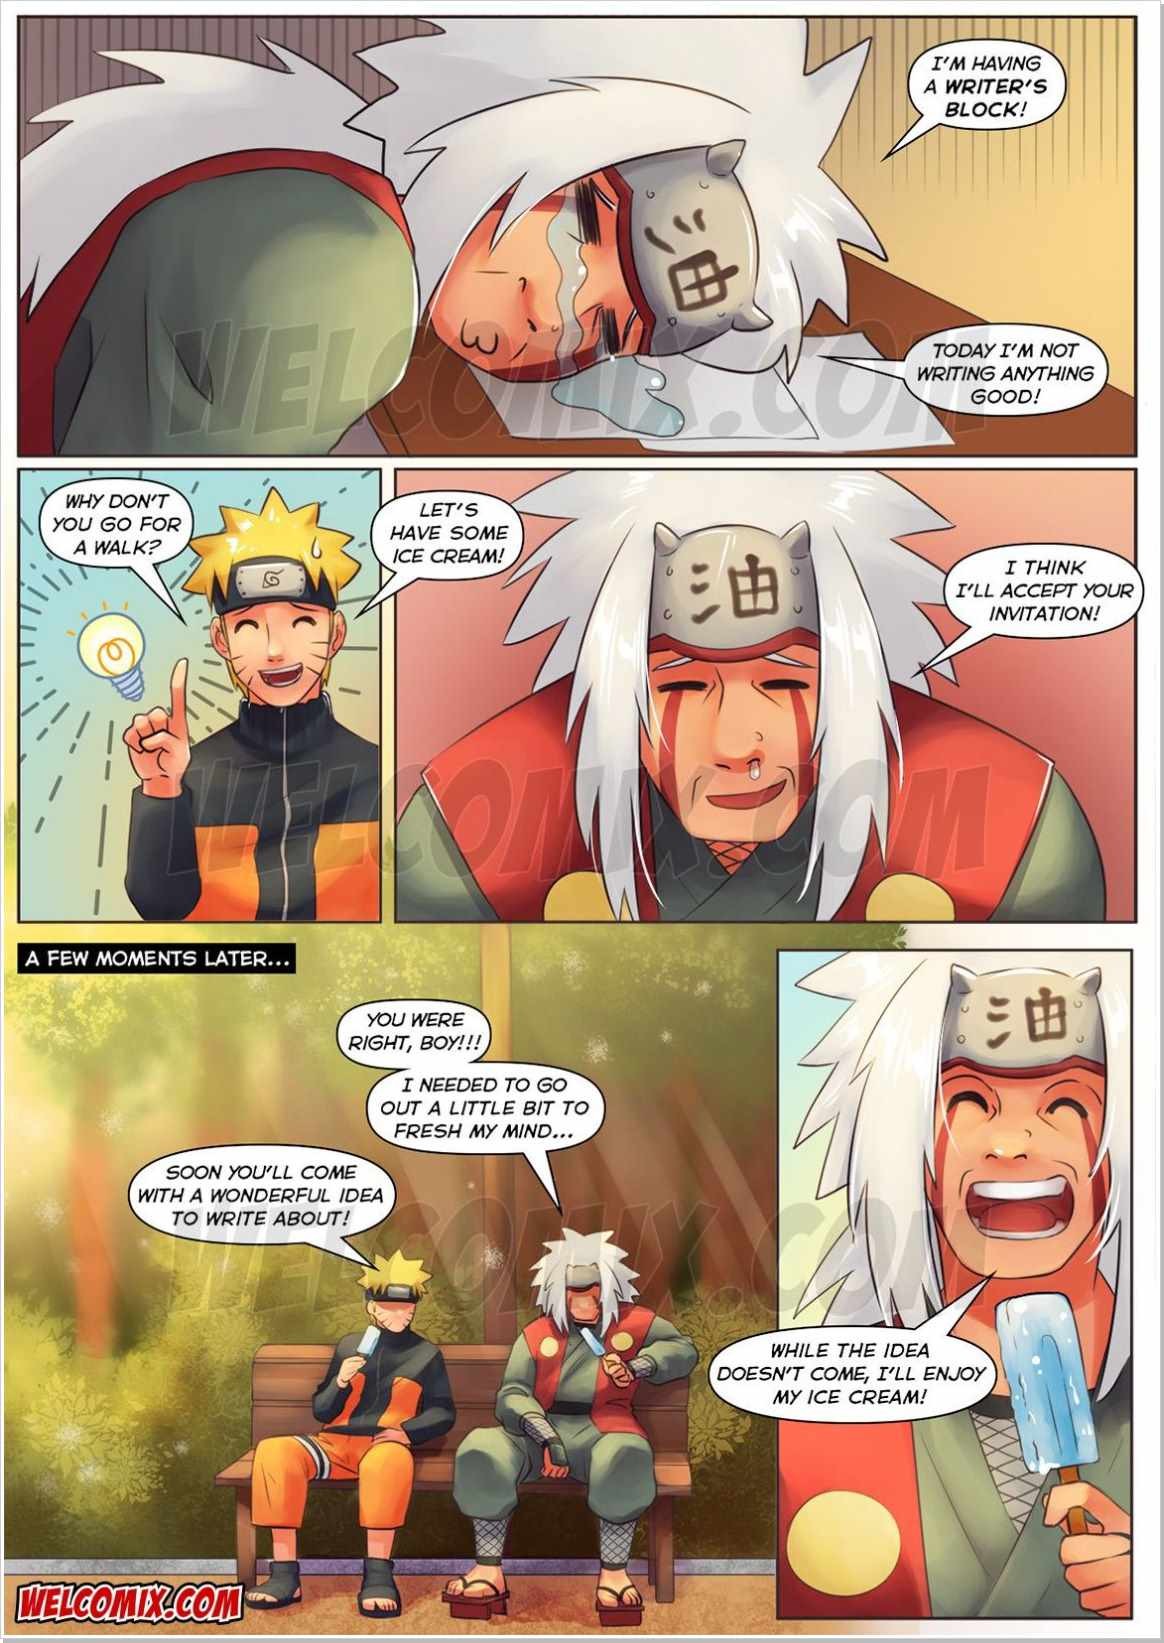 Narutoon 2 - The Erotic Book Writer porn comic picture 3